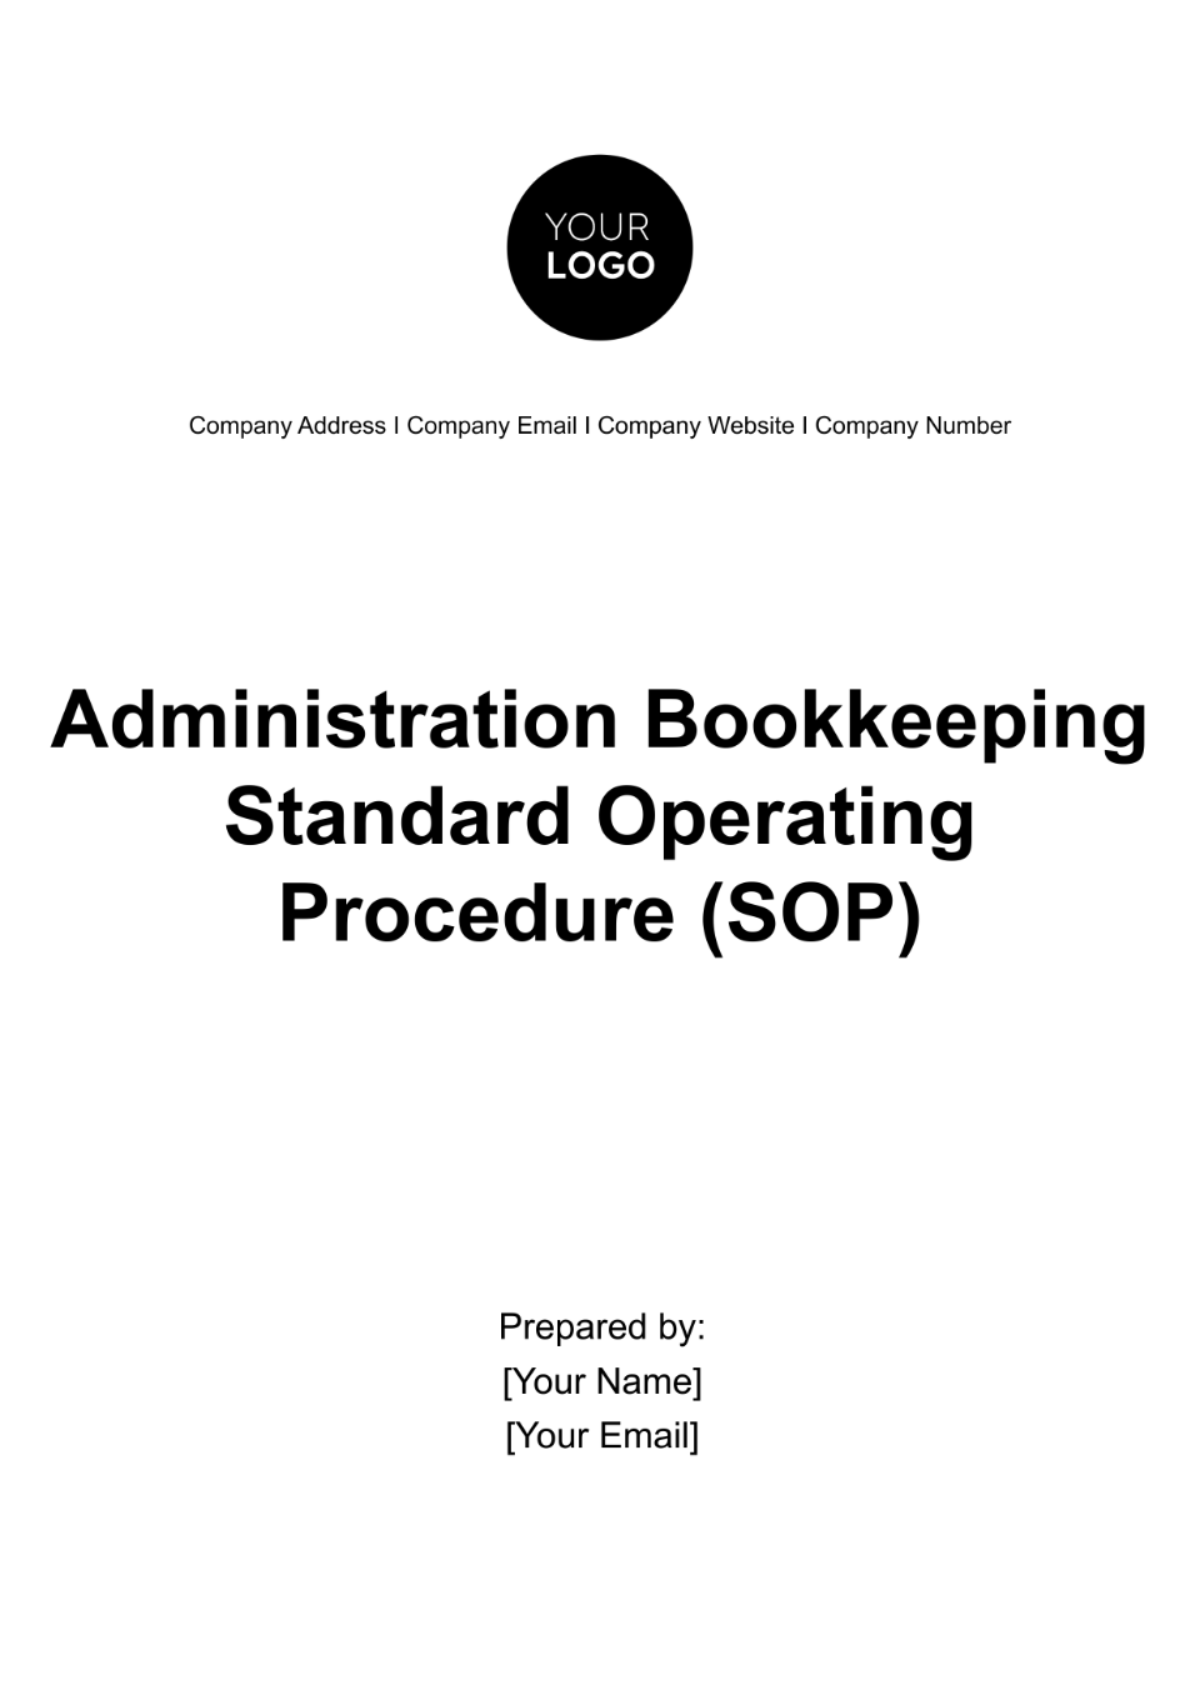 Free Administration Bookkeeping Standard Operating Procedure (SOP) Template